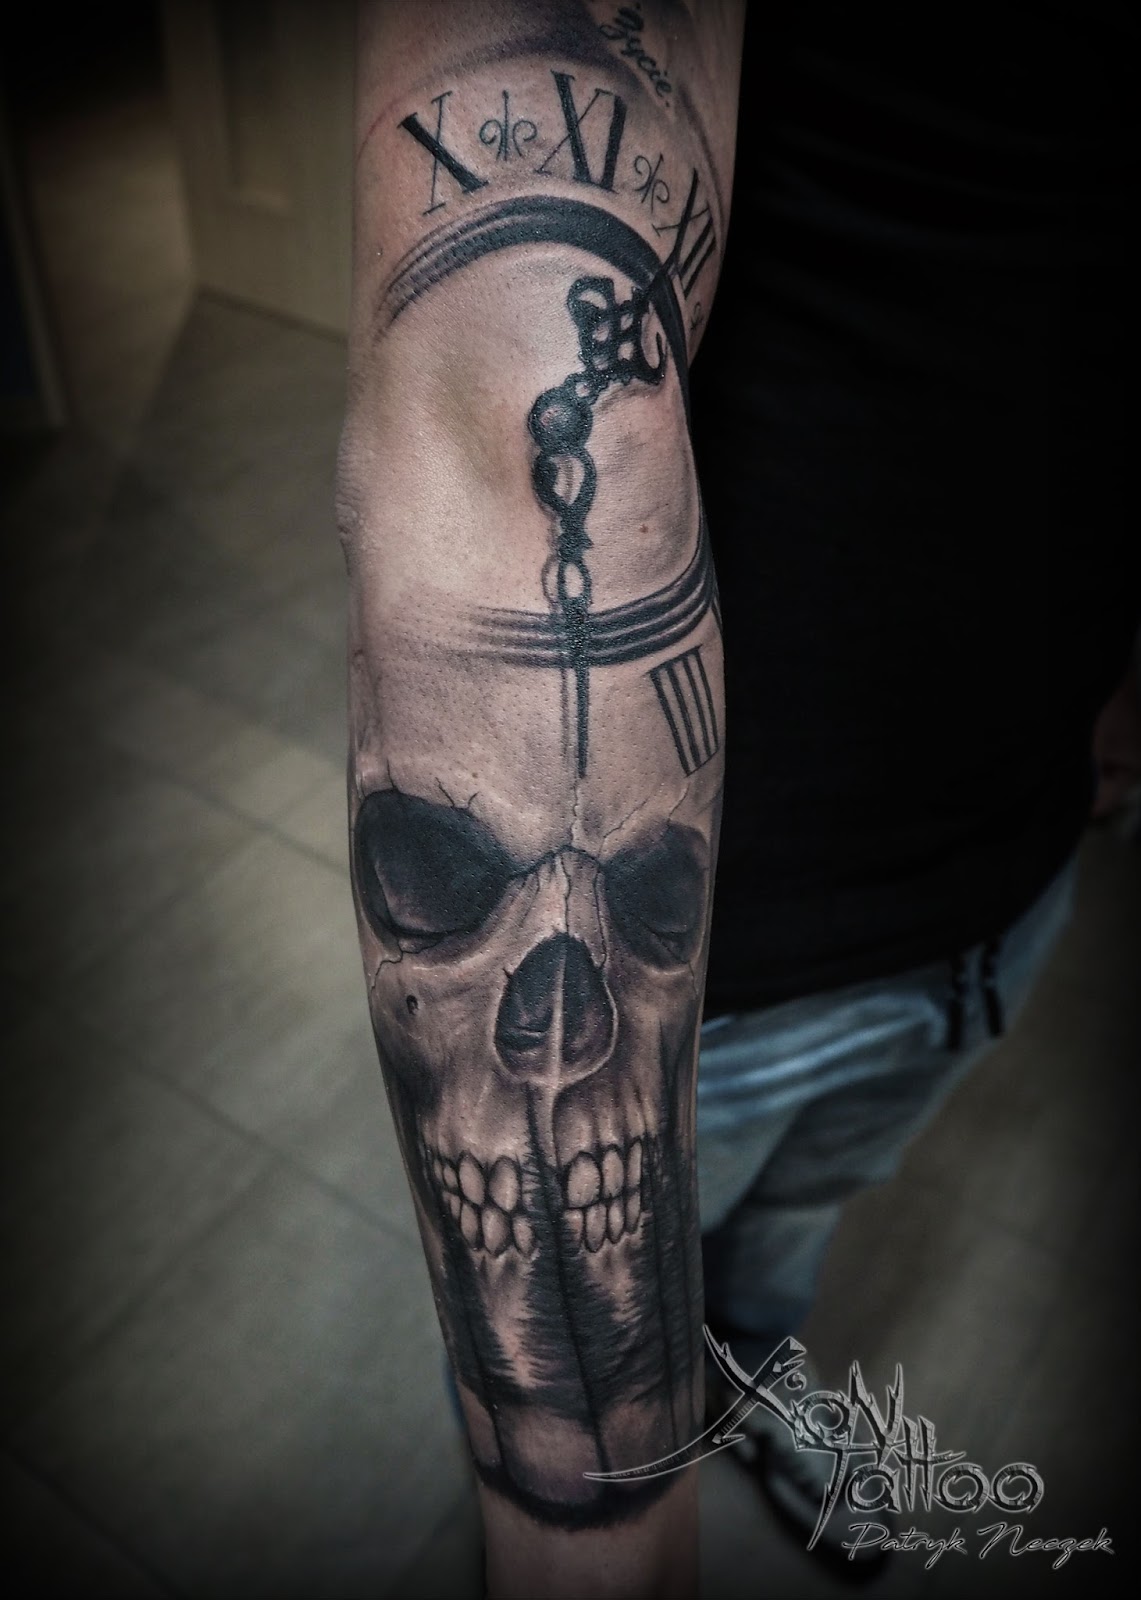 Tattoo uploaded by Jamie blackbourn  Skull and forest added to an outer  forearm to continue this sleeve skull  Tattoodo